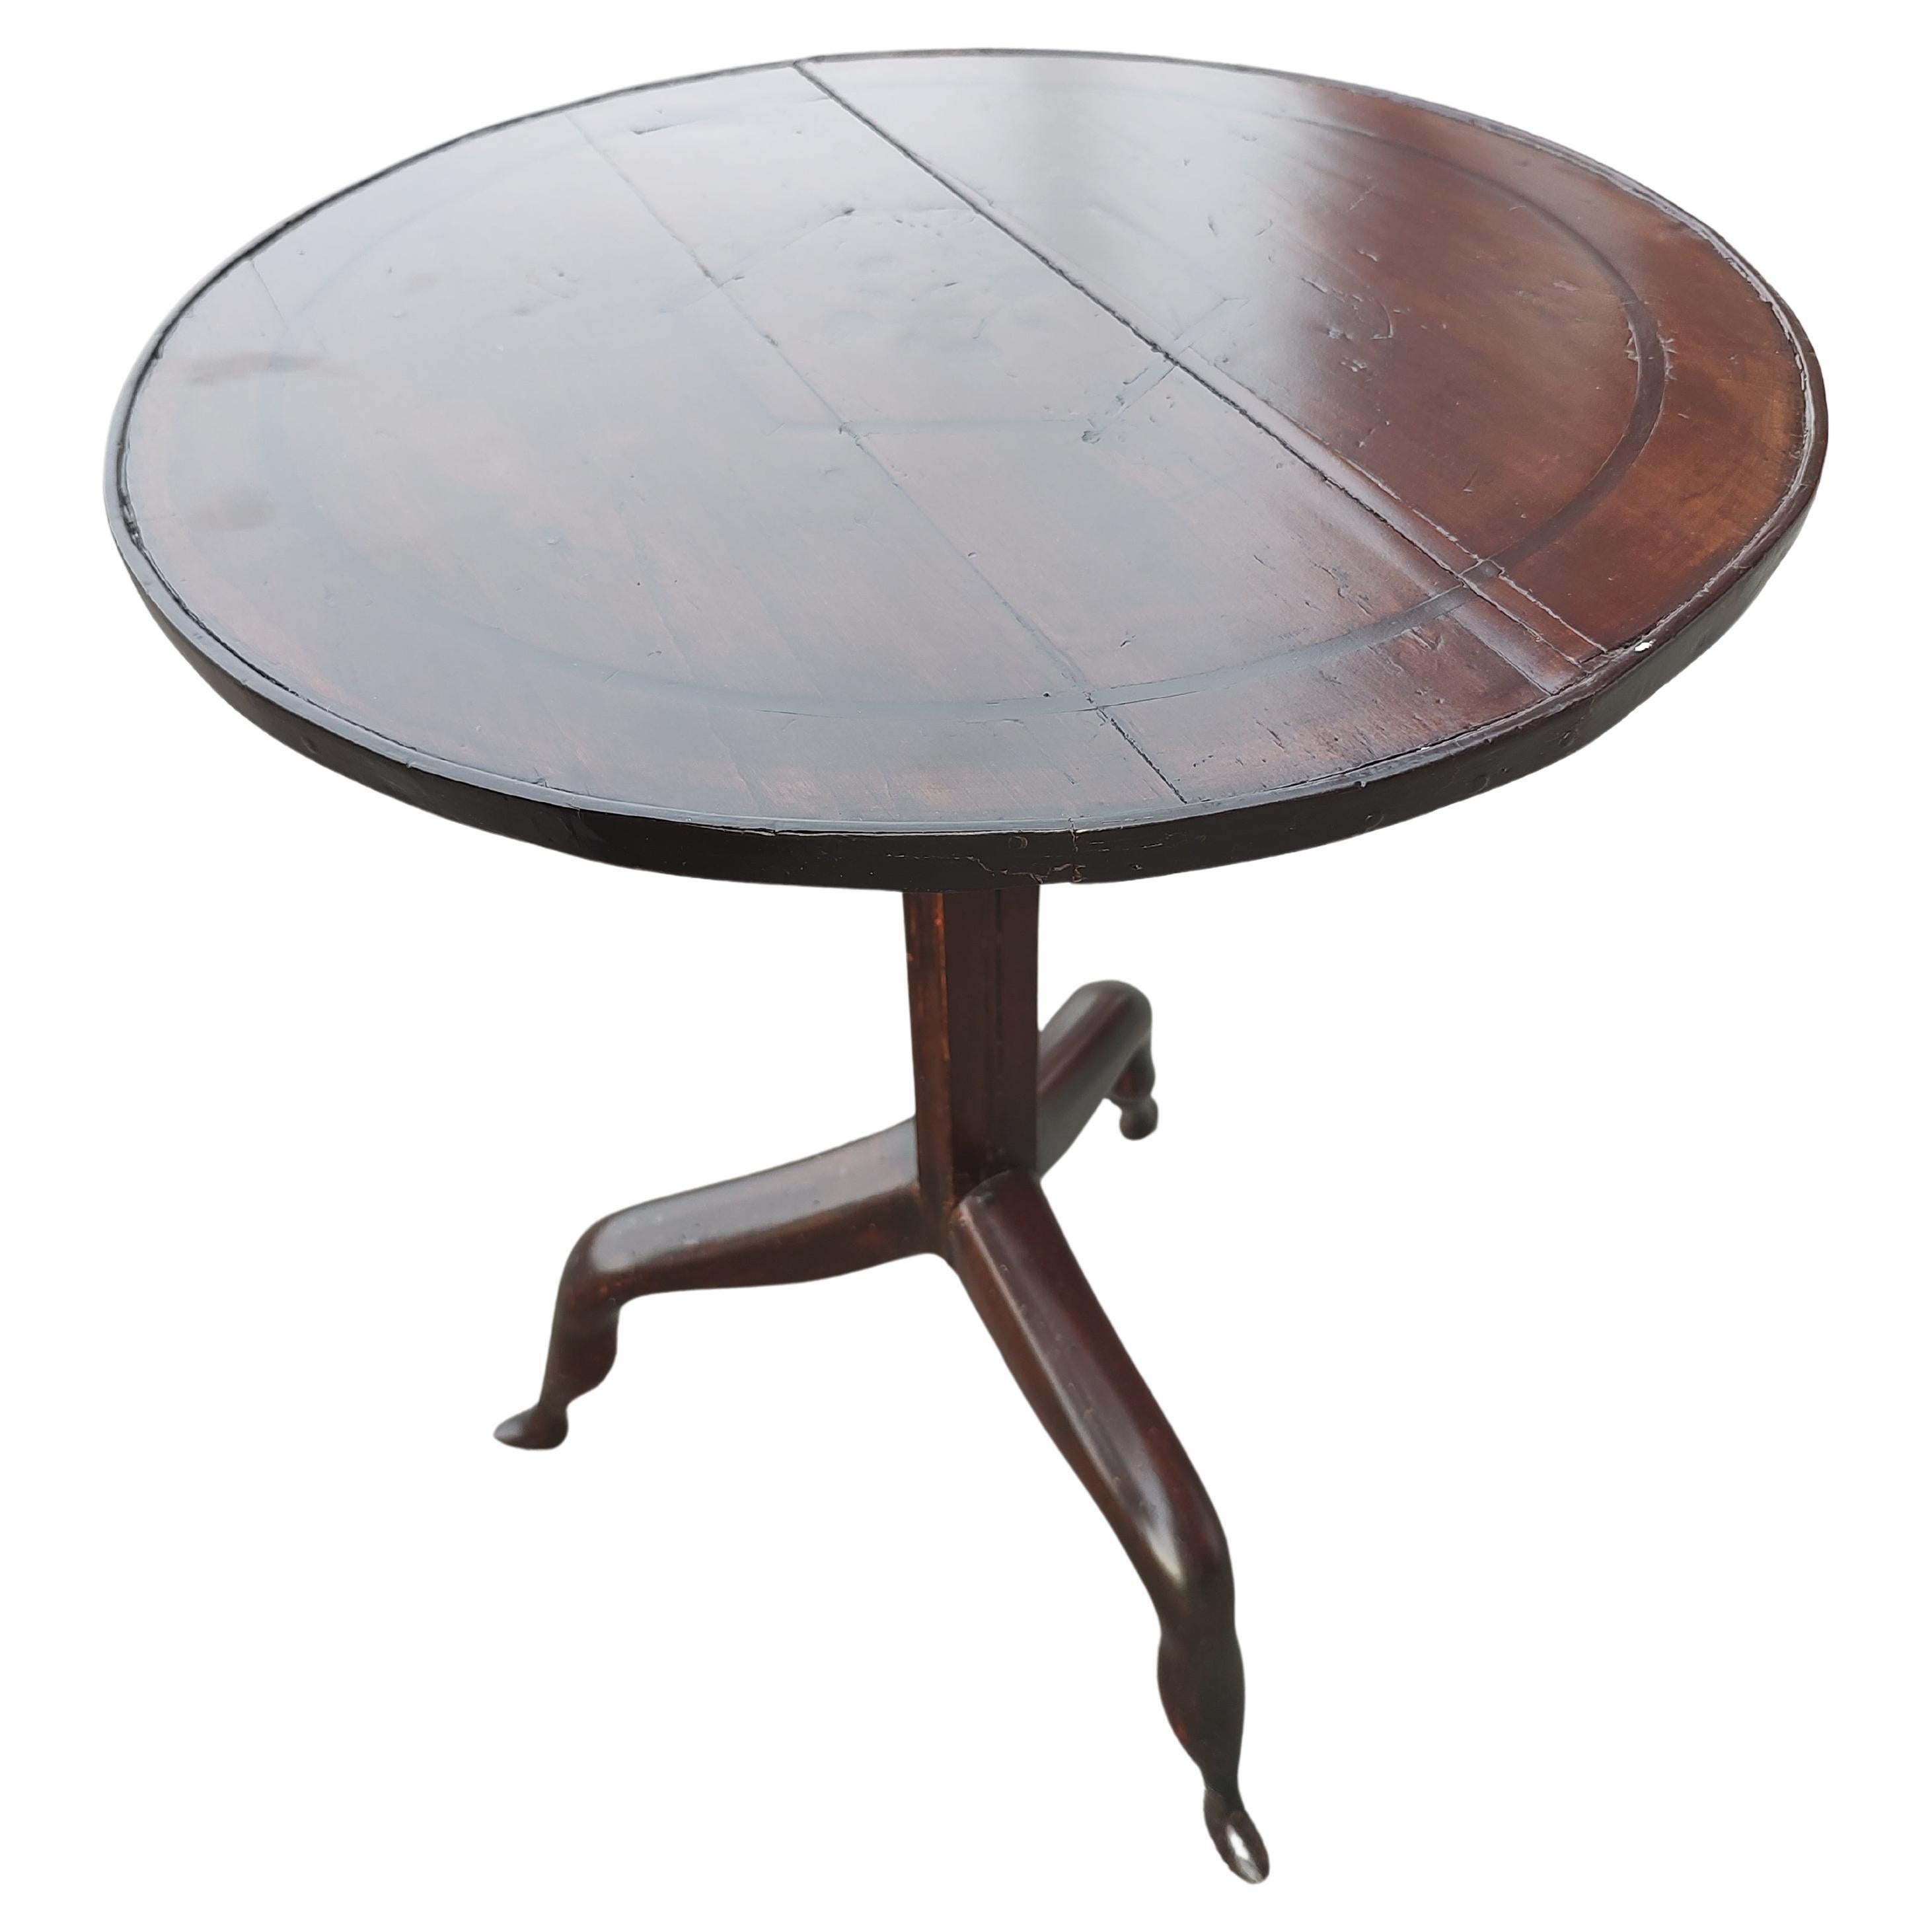 Italian 19thC Tilt Top Table with Birdcage & Shoe Feet and a Discreet Inlay Board Top For Sale